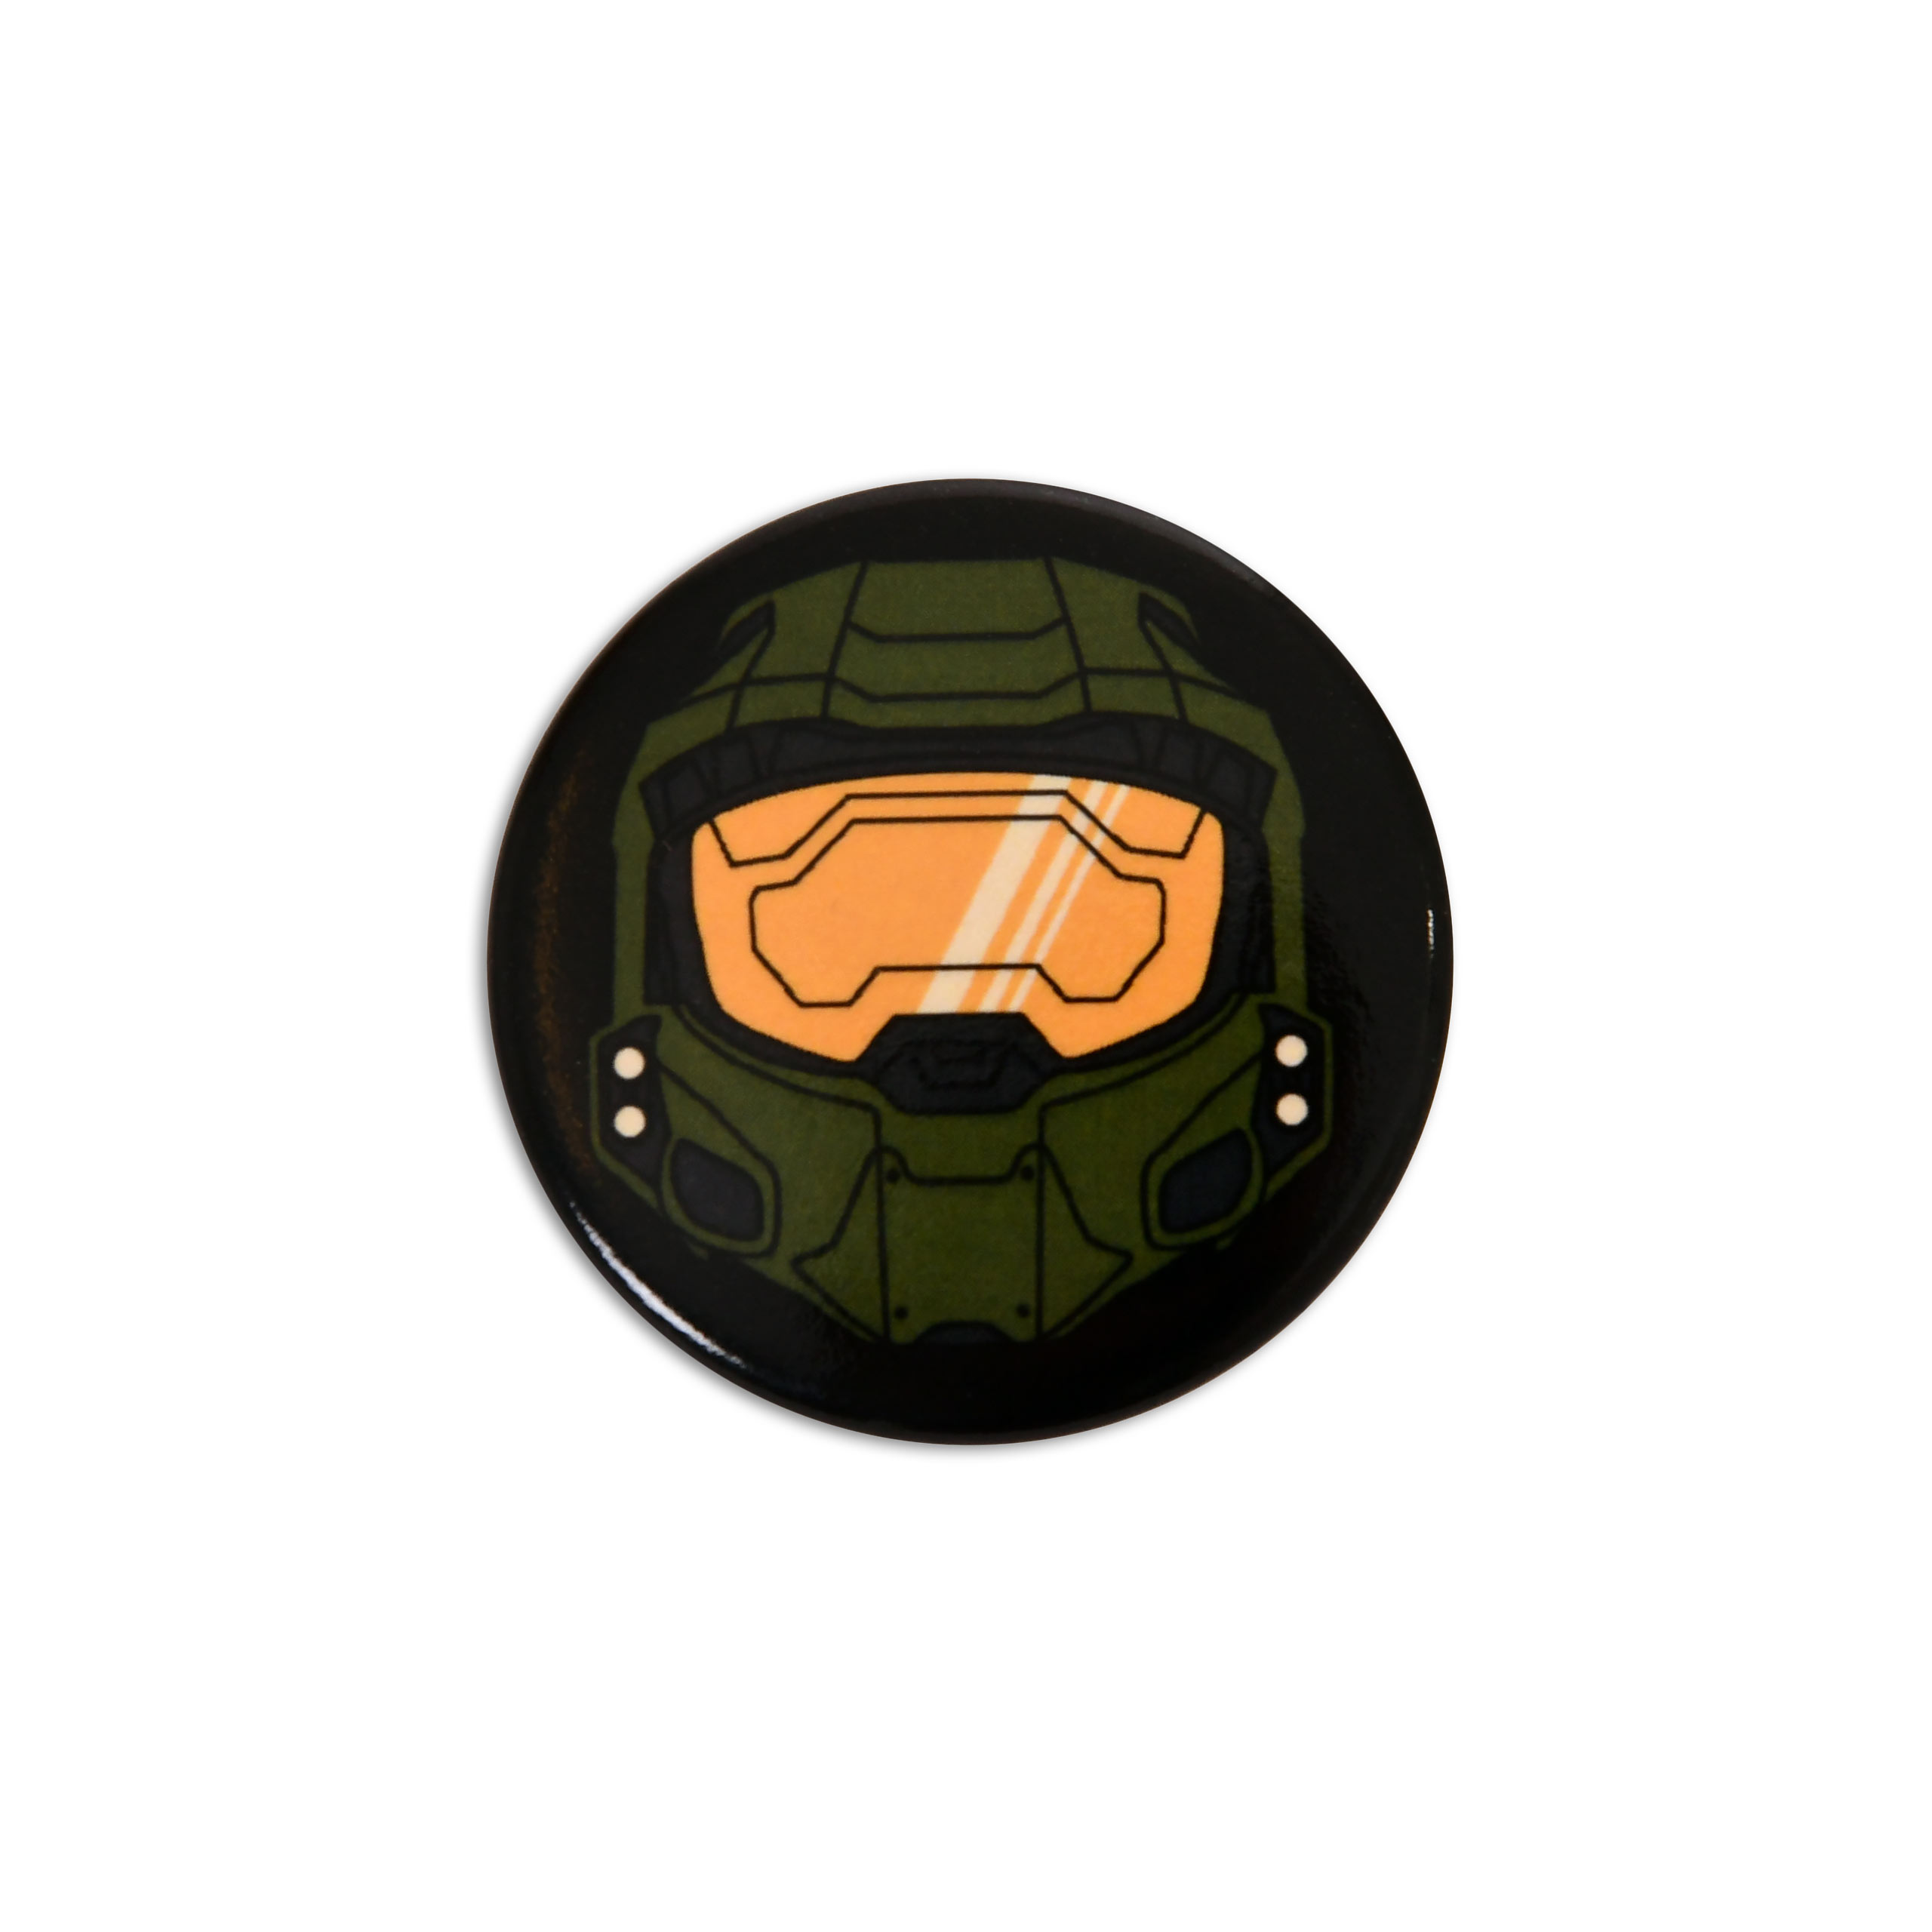 Master Chief Button for Halo Fans